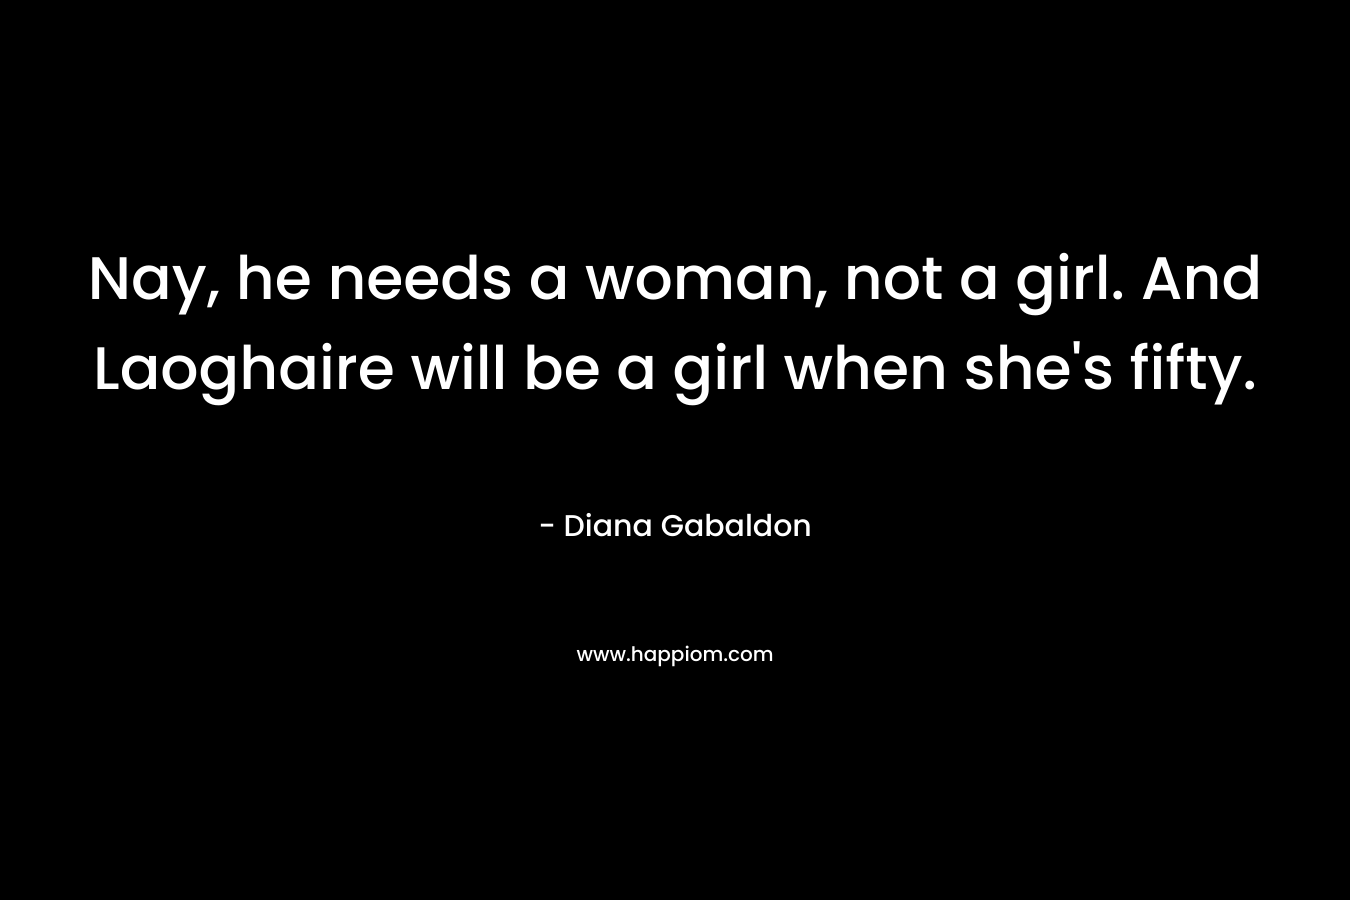 Nay, he needs a woman, not a girl. And Laoghaire will be a girl when she’s fifty. – Diana Gabaldon